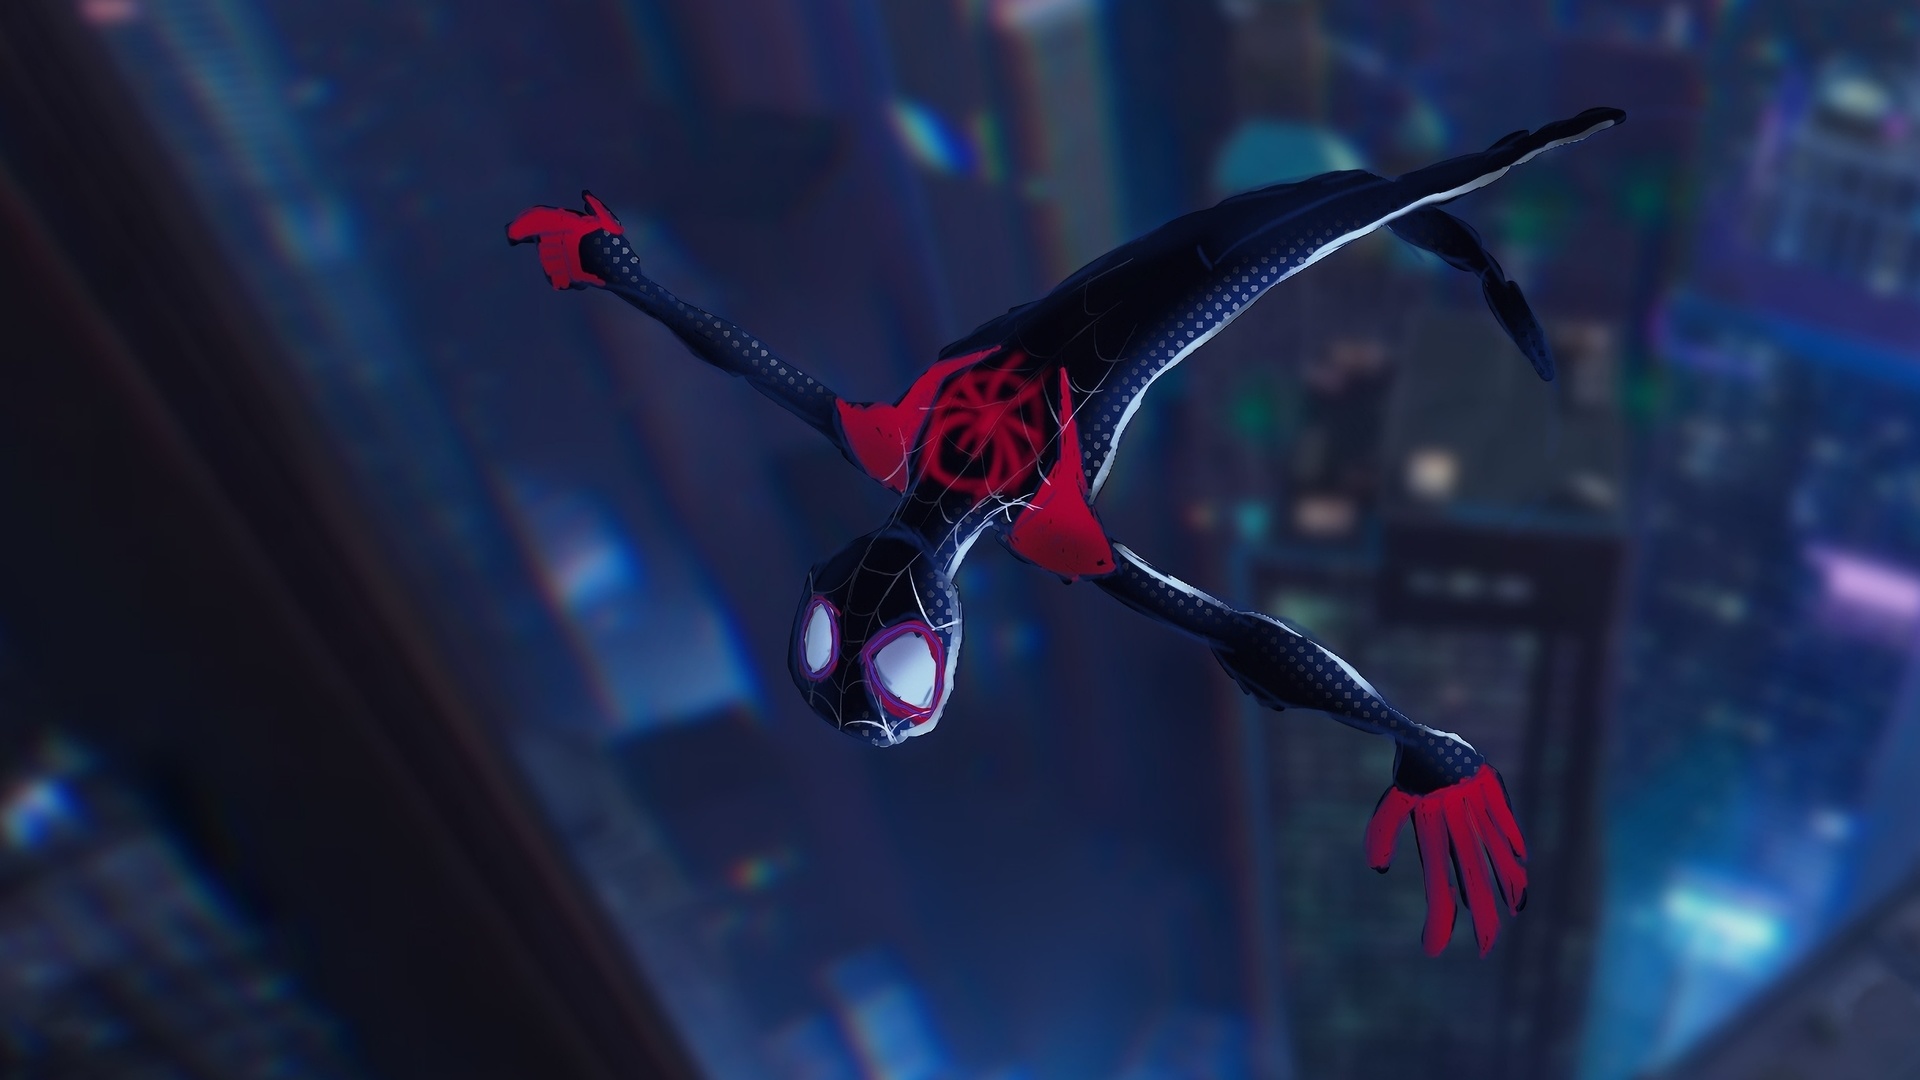 Download 1920x1080 Wallpaper Spider Man Into The Spider